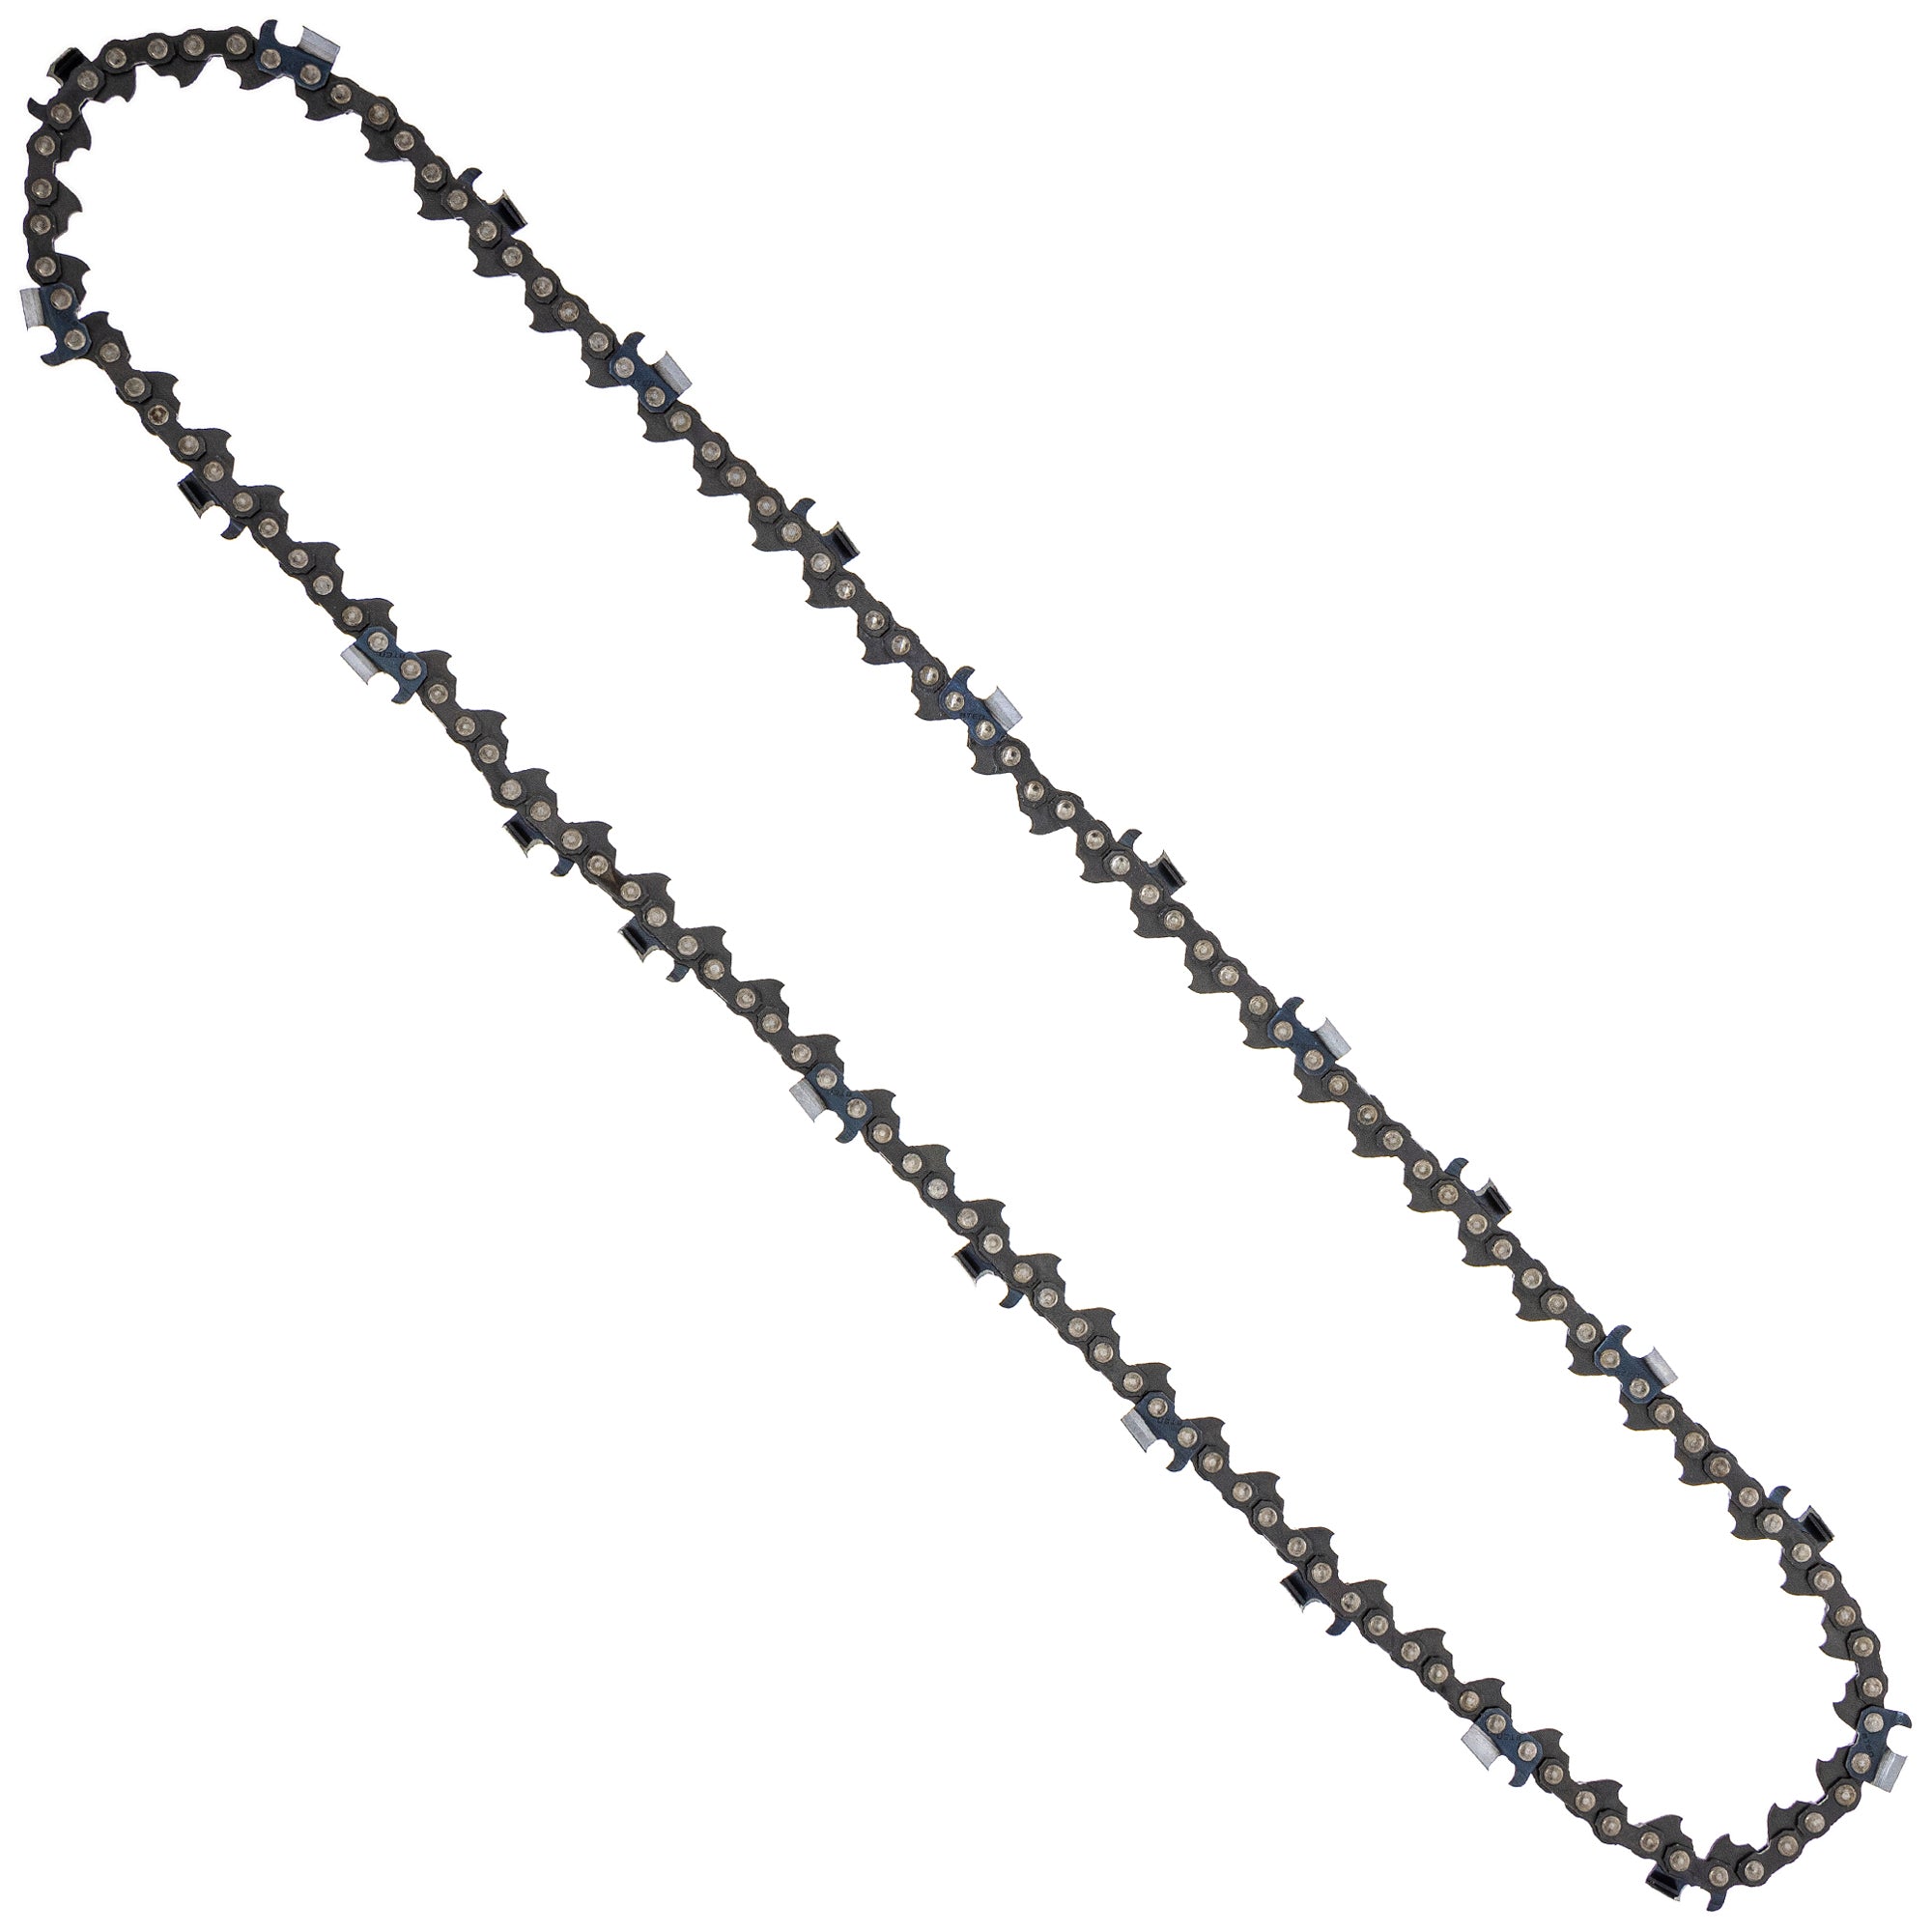 8TEN 810-CCC2392H Chain 4-Pack for zOTHER Oregon Husqvarna Poulan